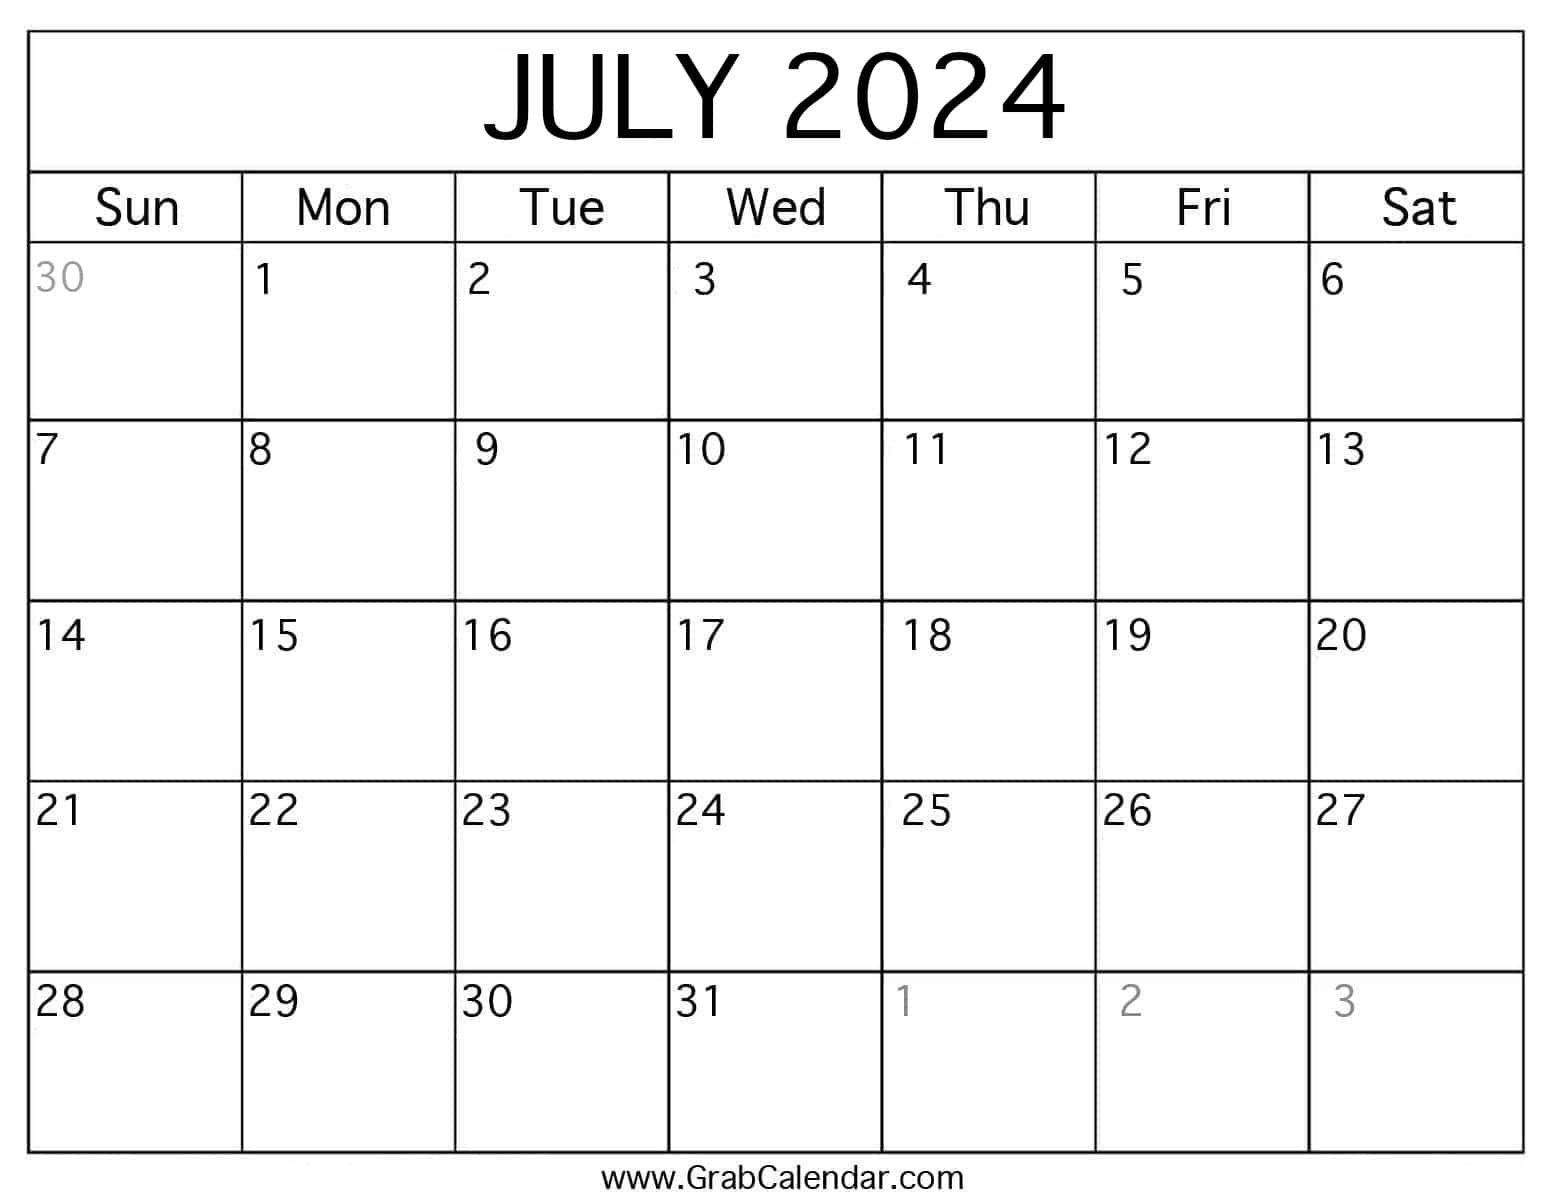 Printable July 2024 Calendar pertaining to Calendar From July 2024